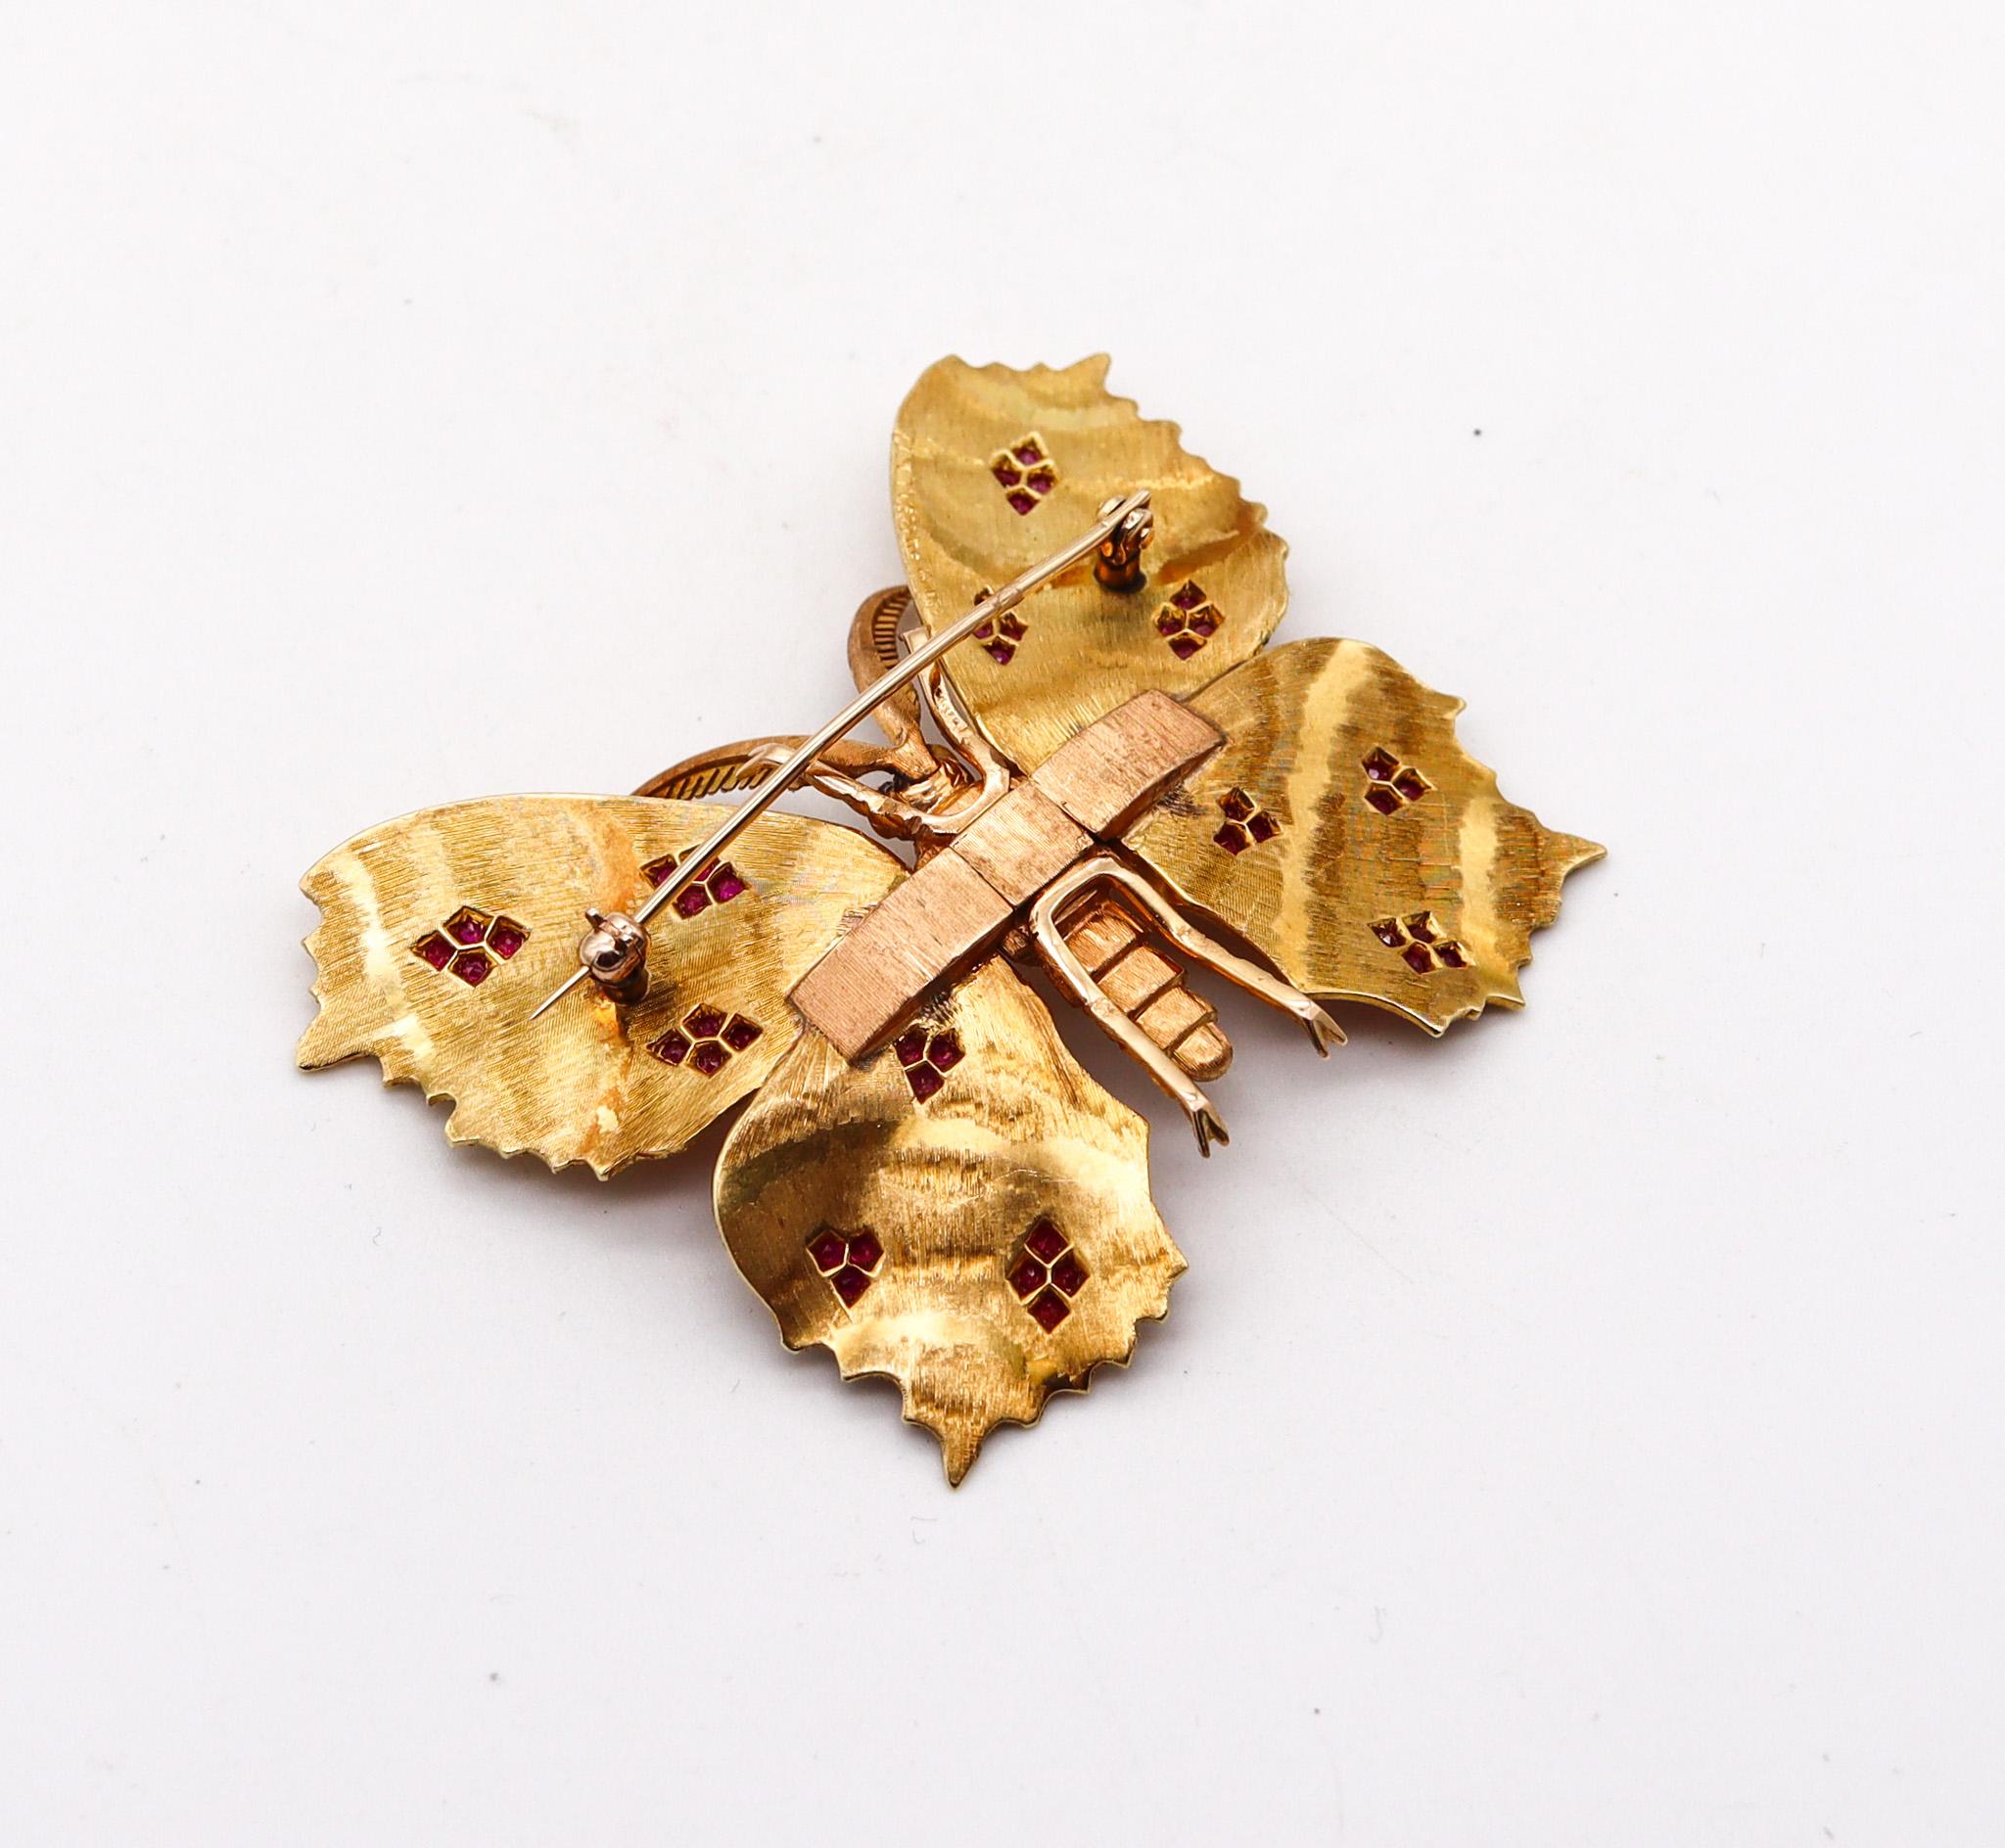 Baroque Revival Mario Buccellati 1970 Milan Butterfly Brooch In 18Kt Yellow Gold With Red Rubies